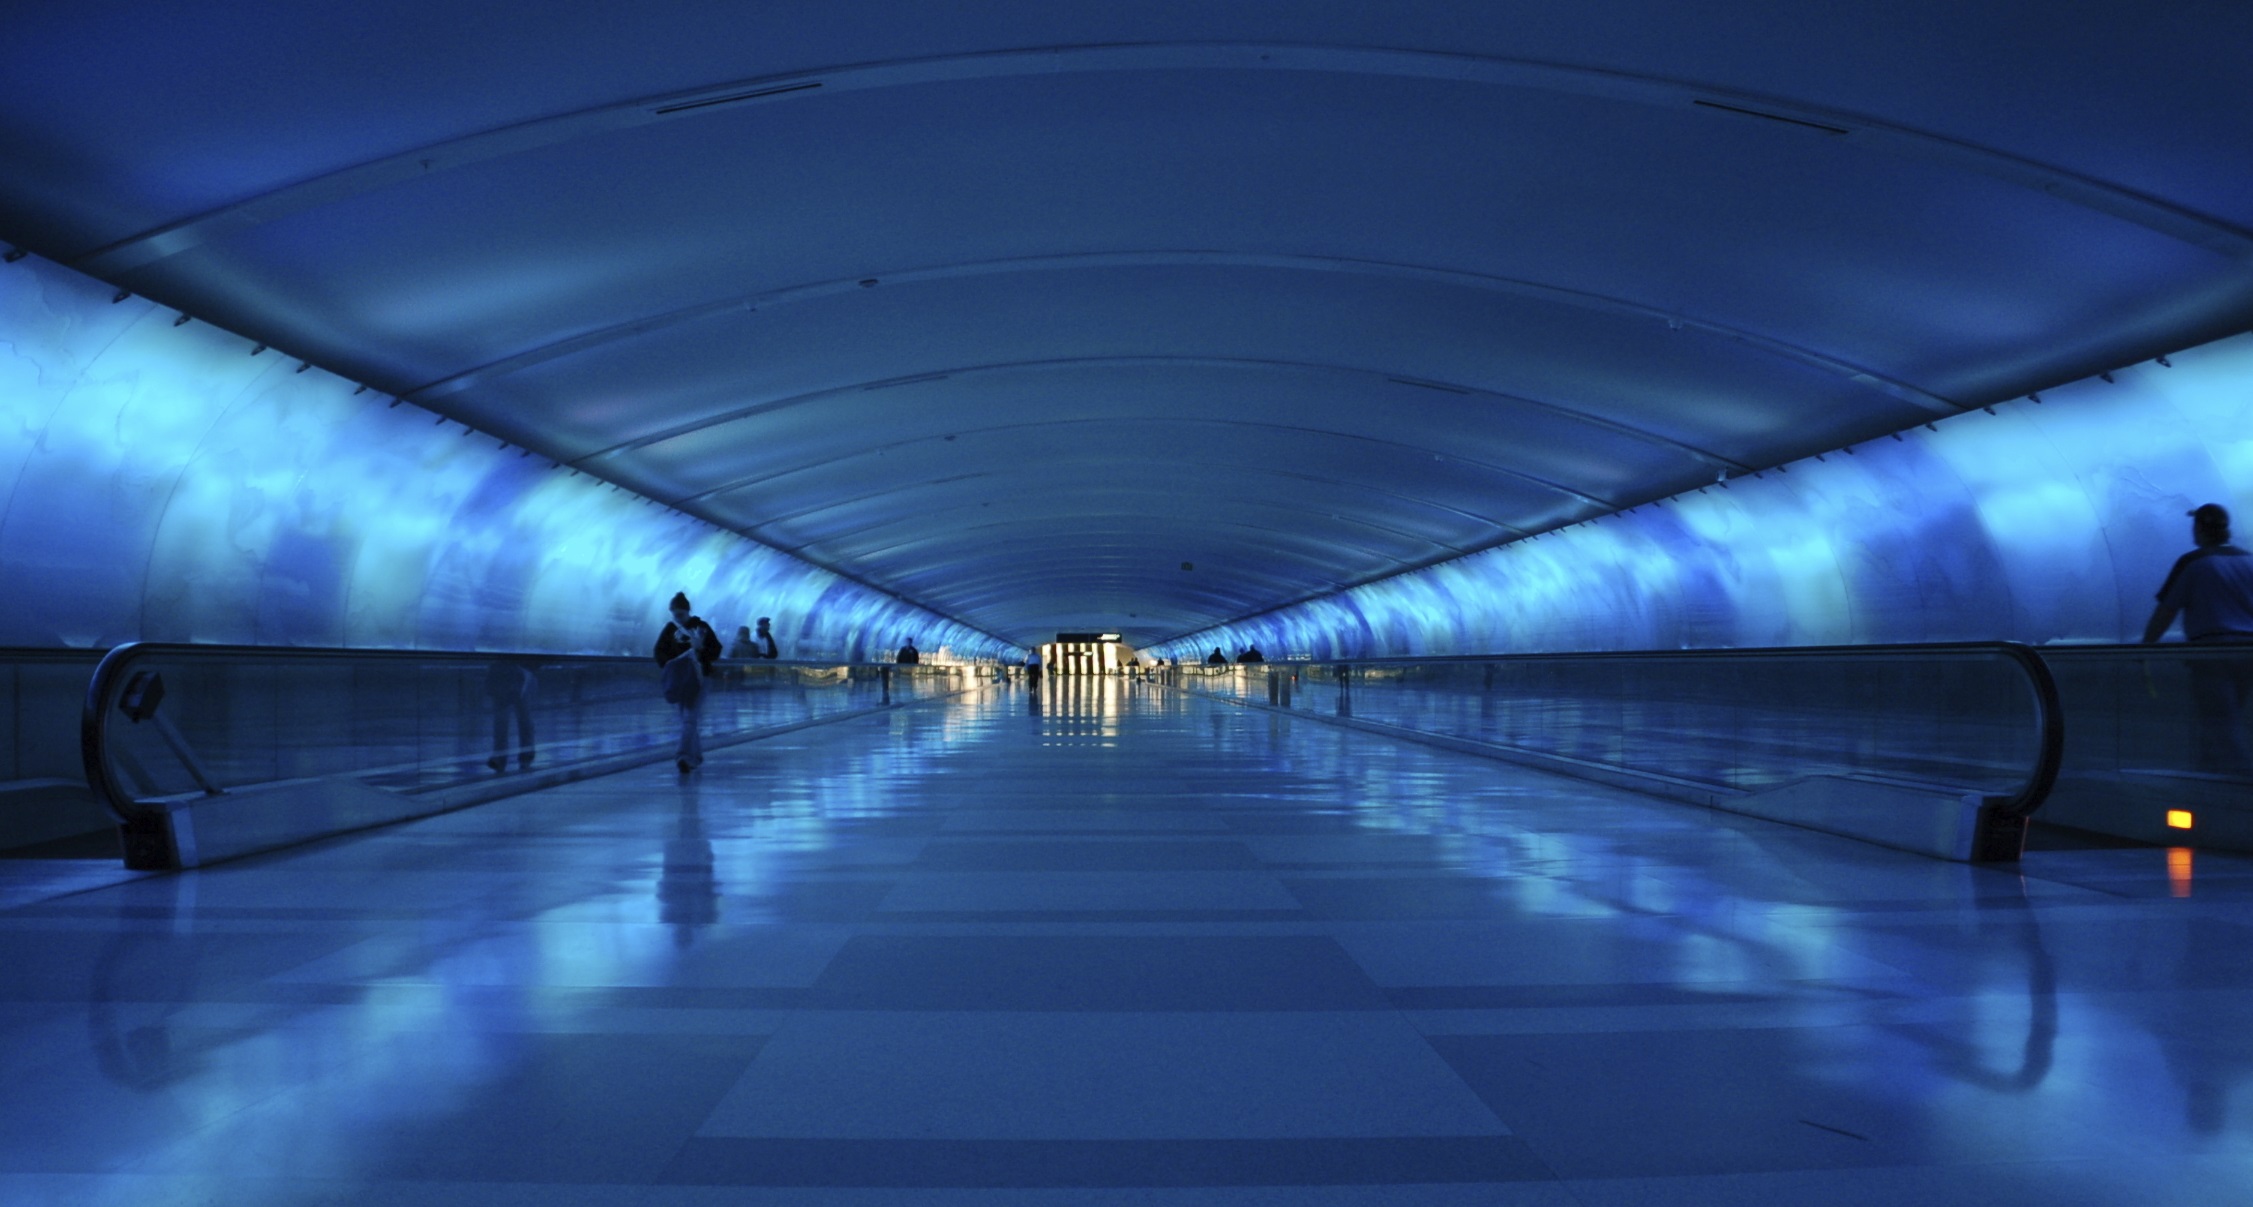 The,Blue,Lighted,Tunnel,In,Detroit,Metro,Airport,Complete,With